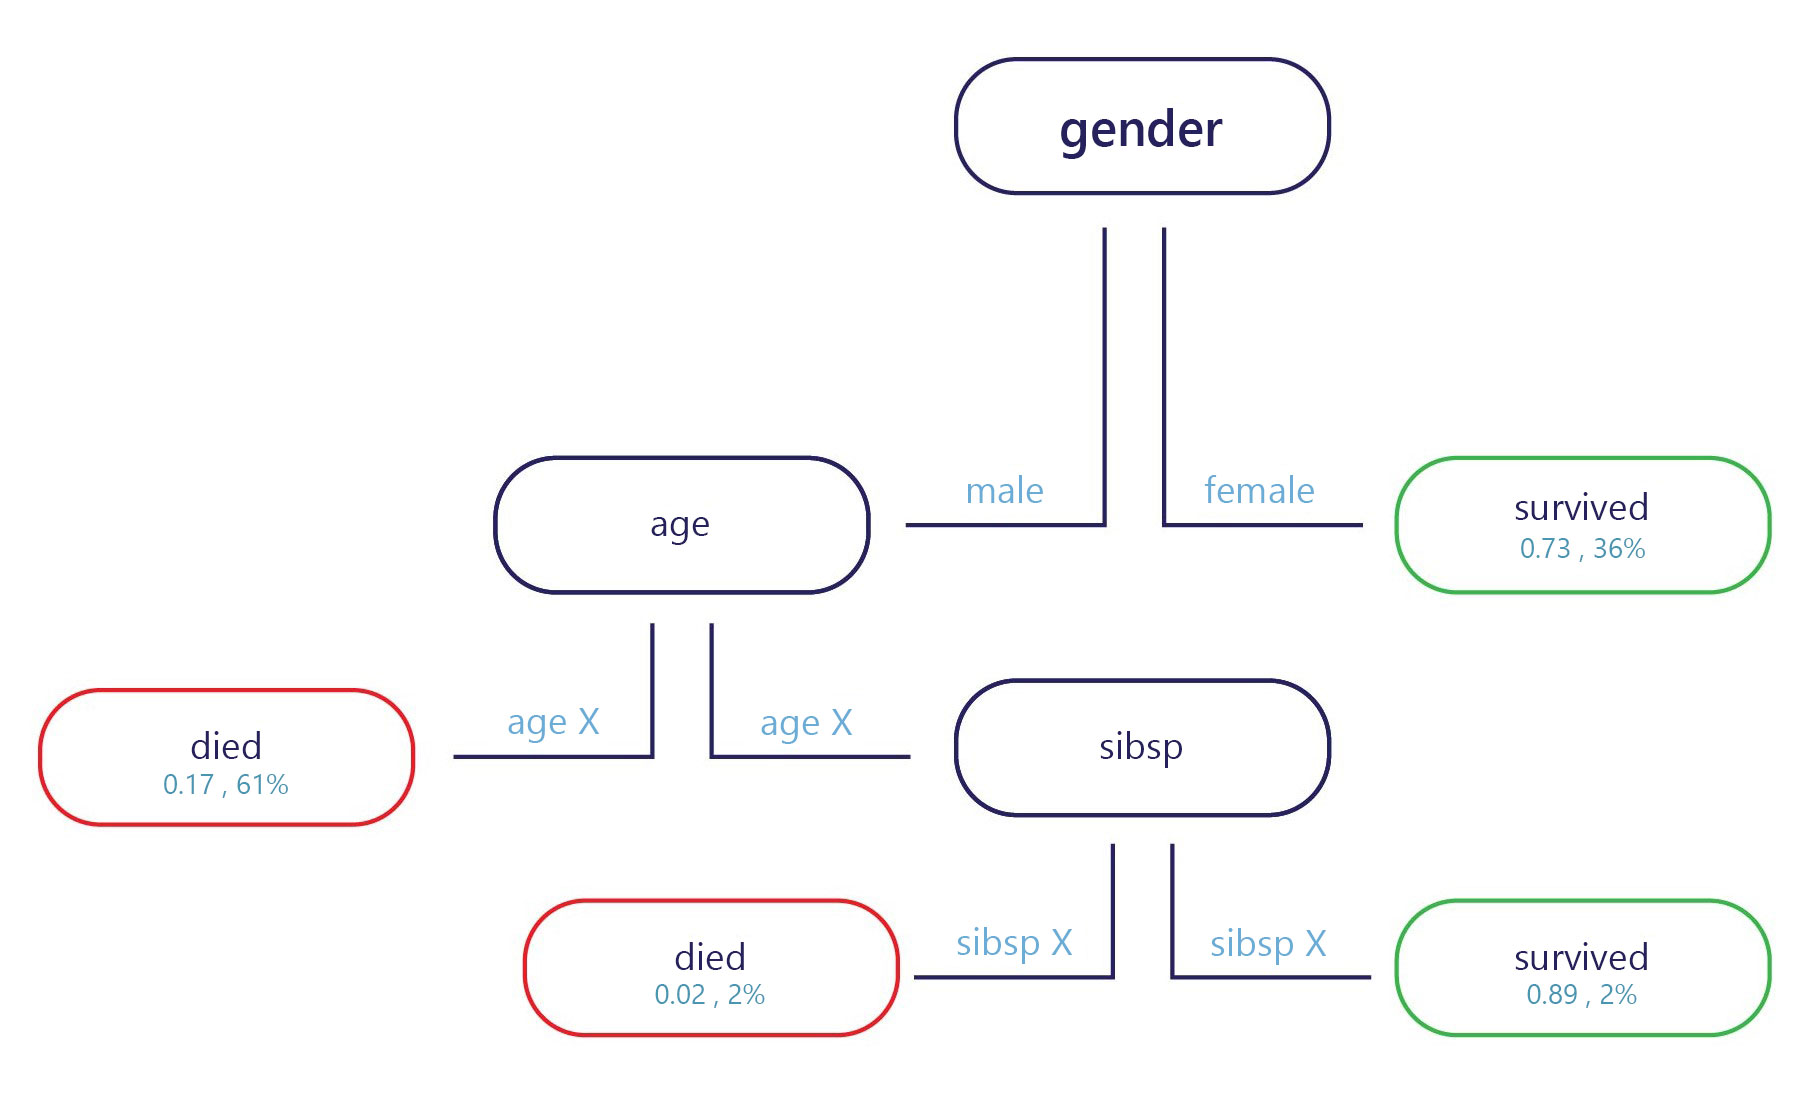 Diagram showing a decision tree of gender, age, and survival rate.